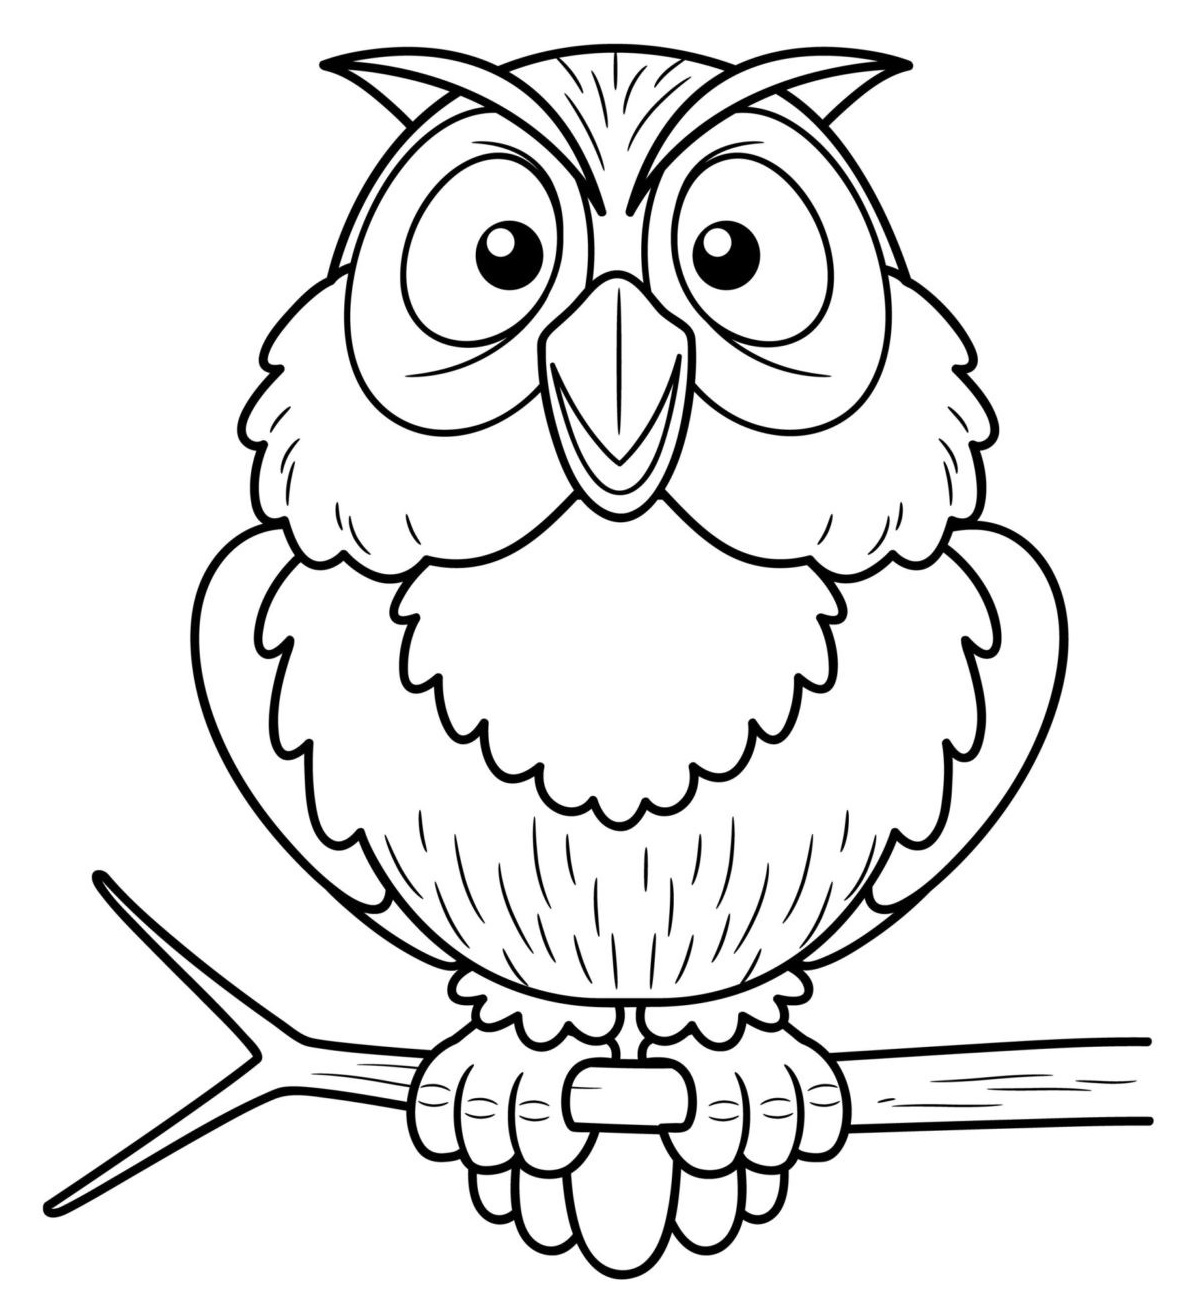 Hoot Owl Coloring Page